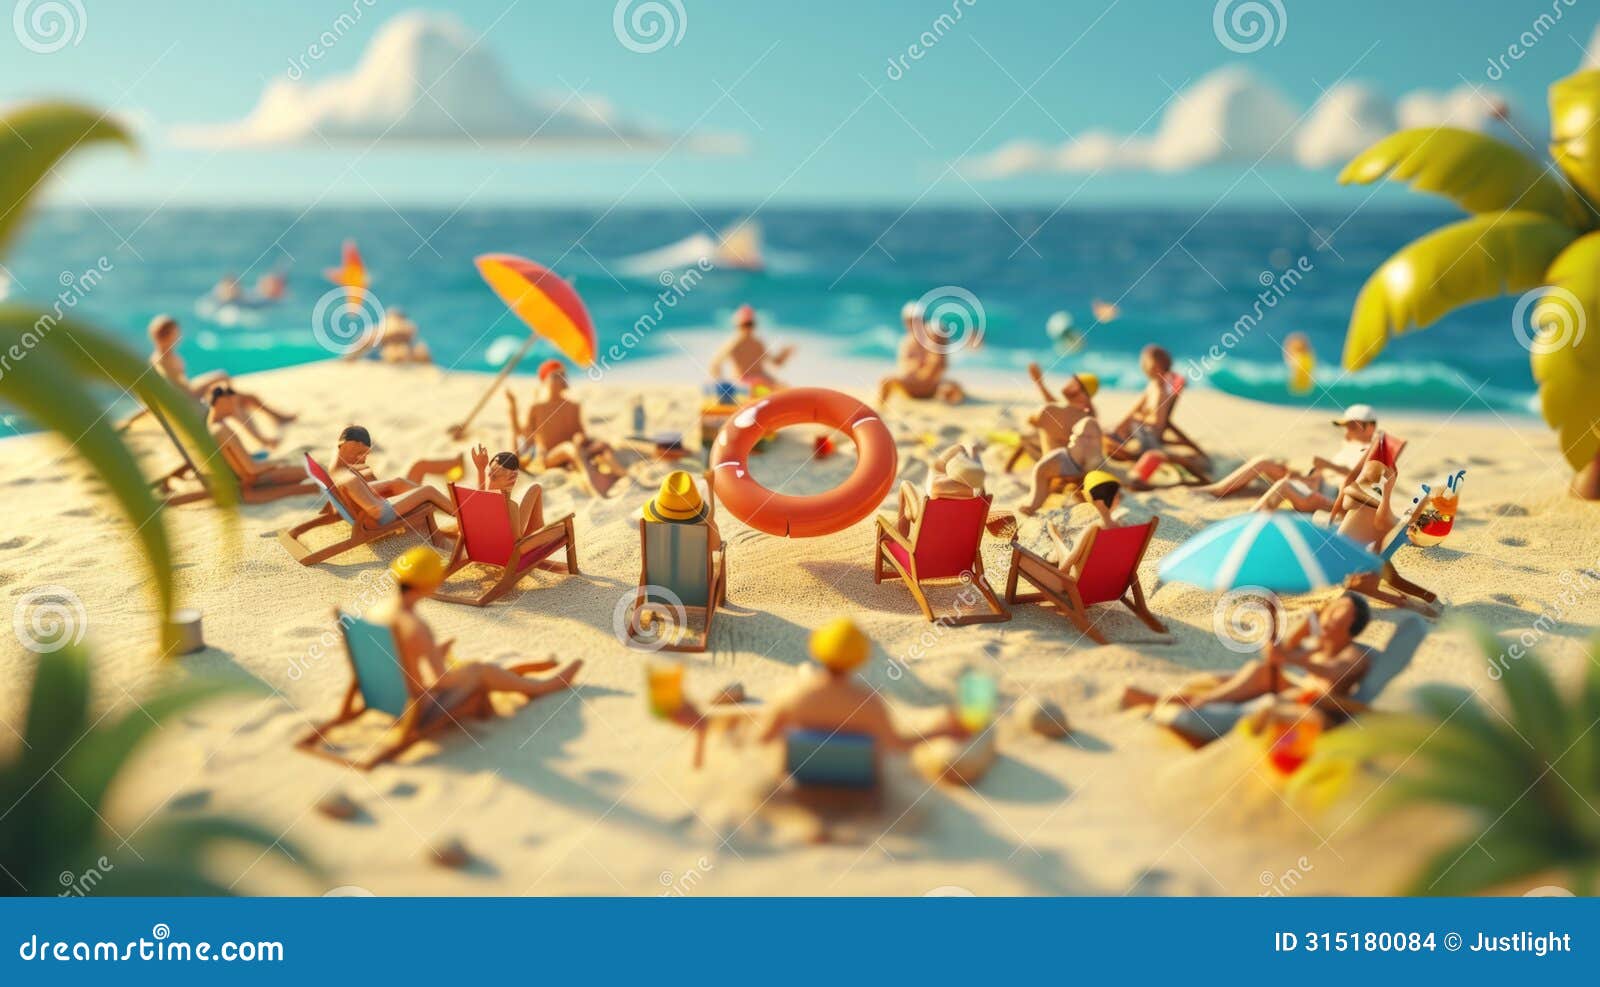 cartoon scene of a group of lilliputian sunbathers trying to fit their tiny beach chairs into the sand only to comically